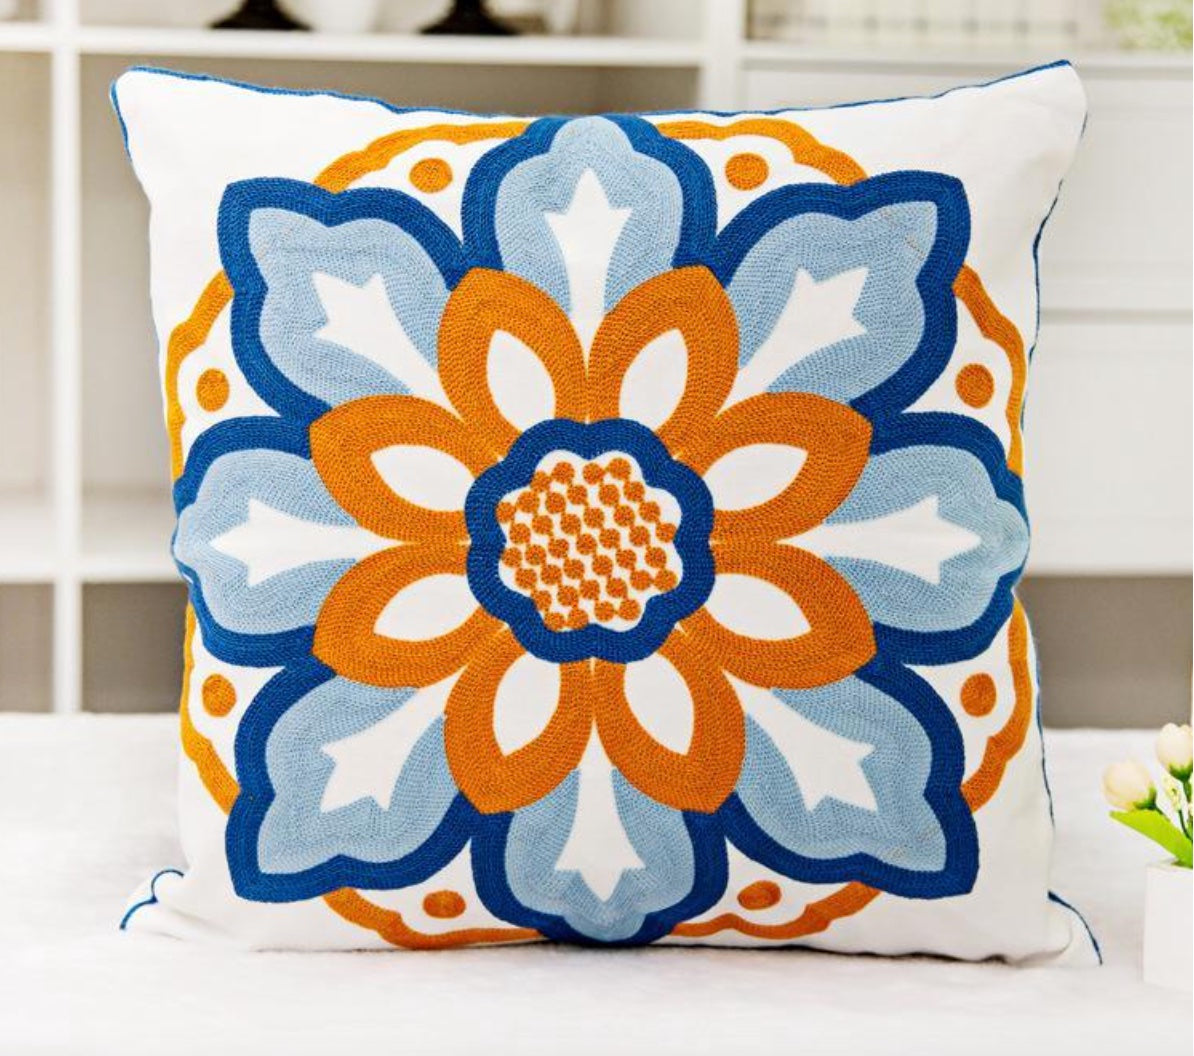 Southern folk sunflower orange and blue, embroidered Cushion cover, 45cm